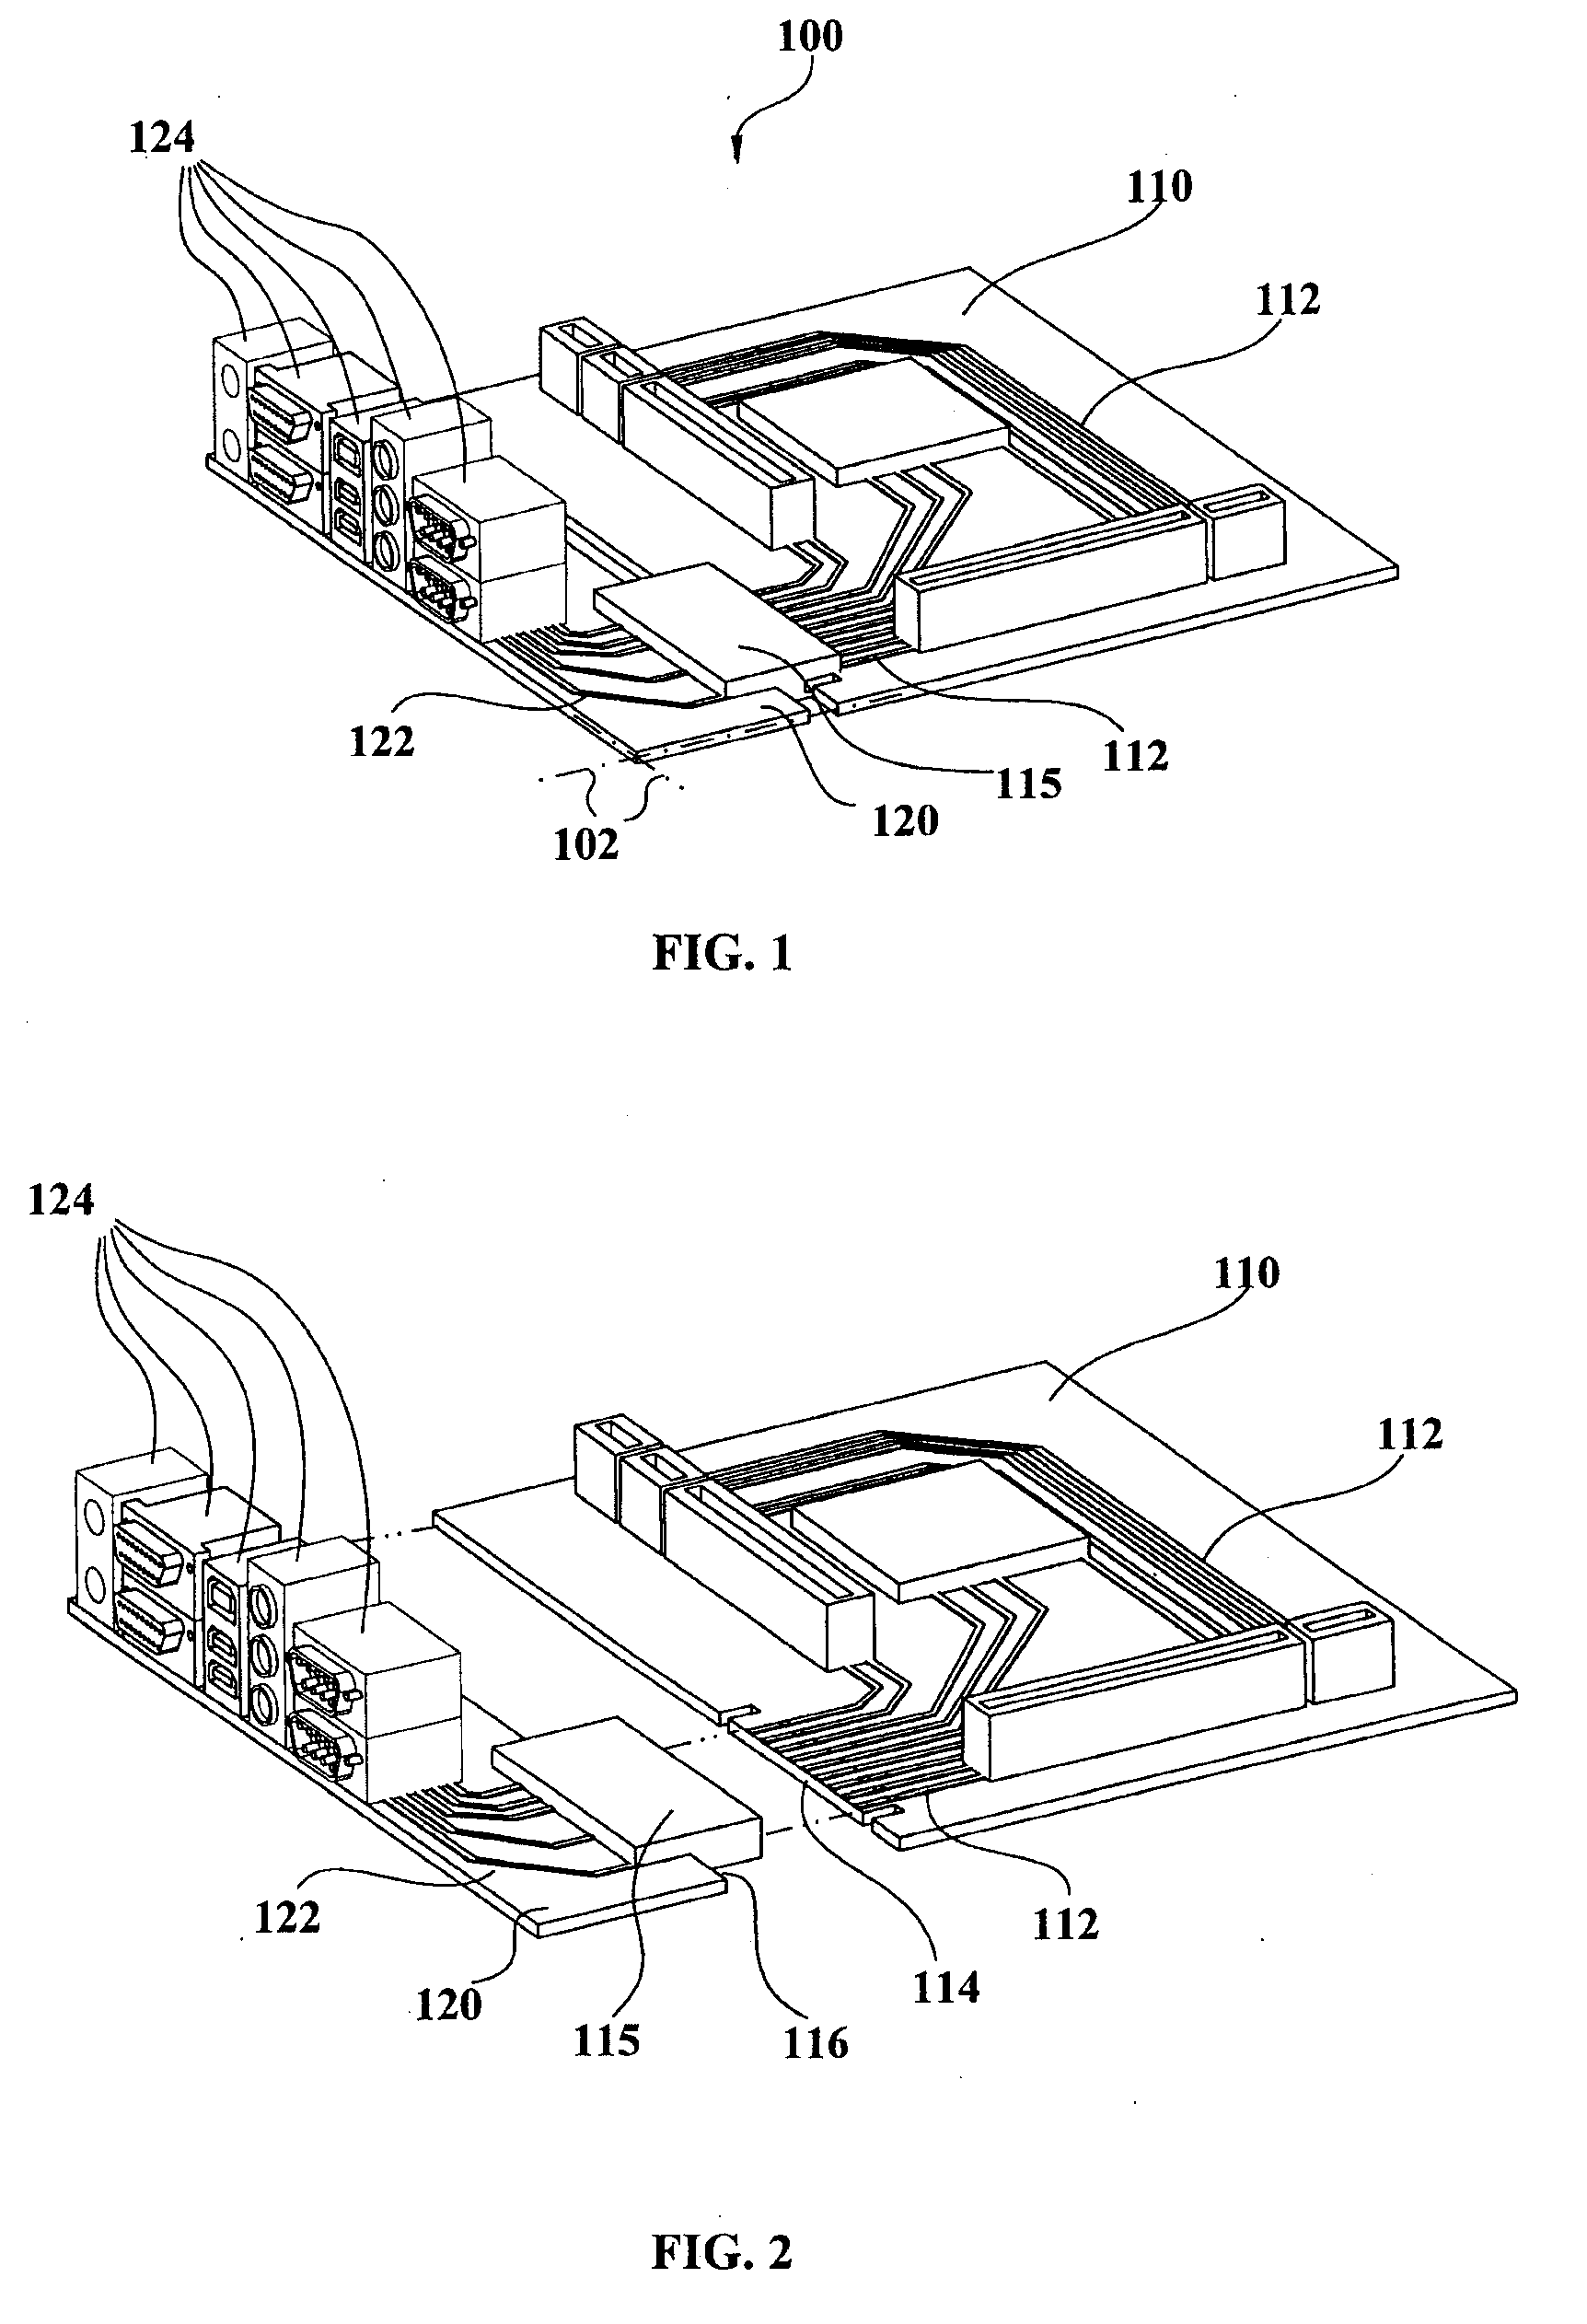 Computer system having customizable printed circuit boards